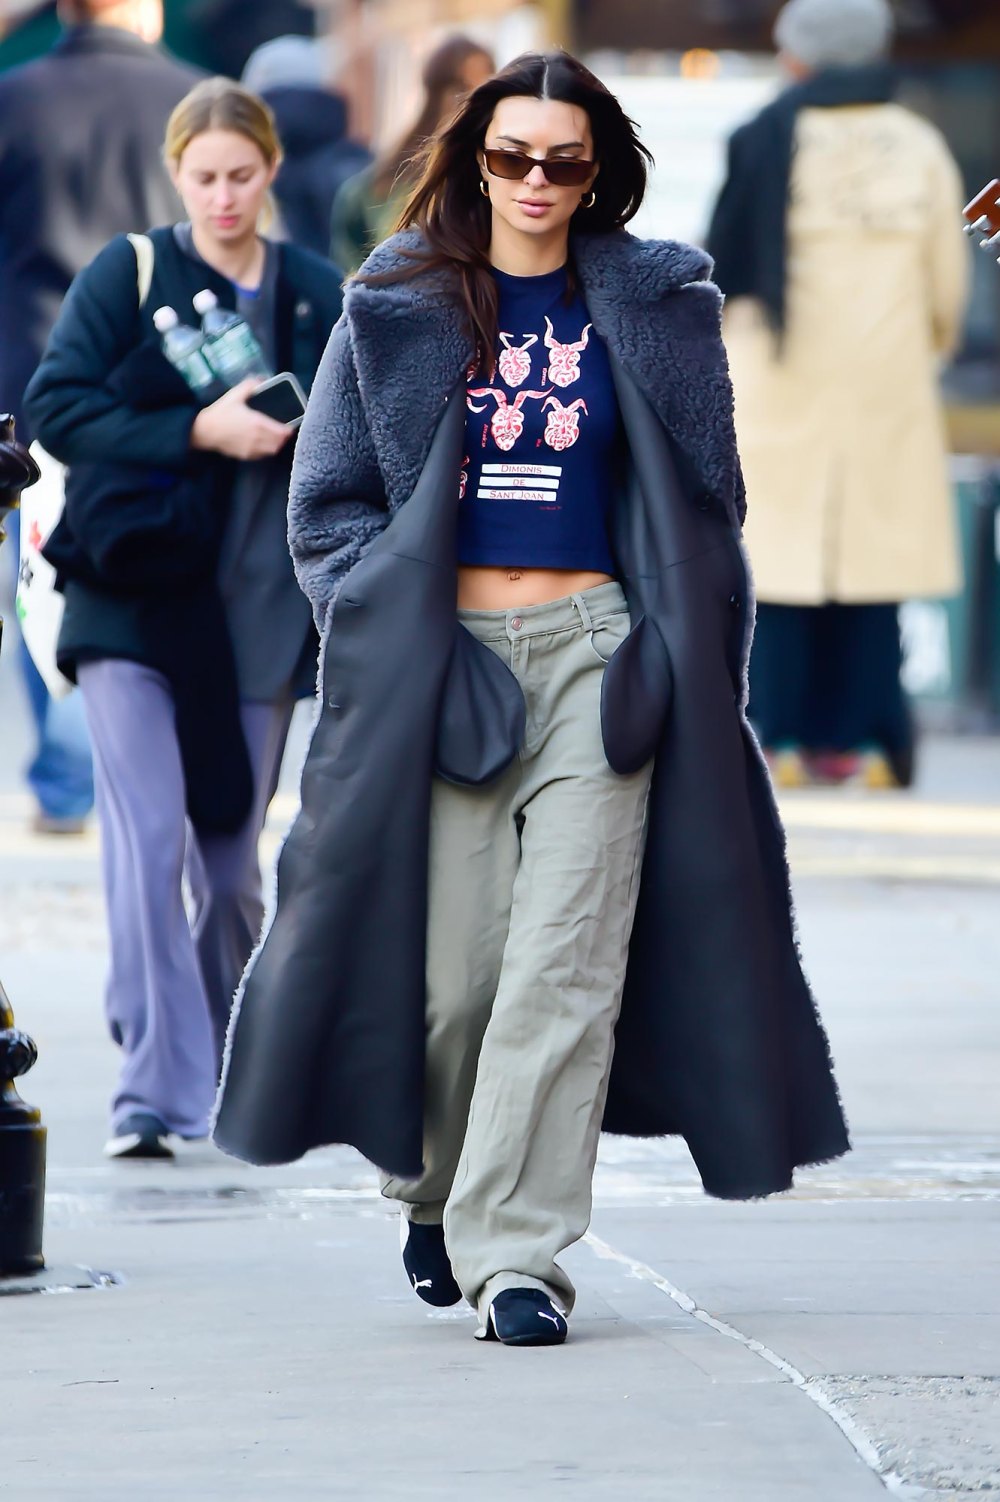 Emily Ratajkowski Pairs a Crop Top With a Sheepskin Coat in NYC | Us Weekly